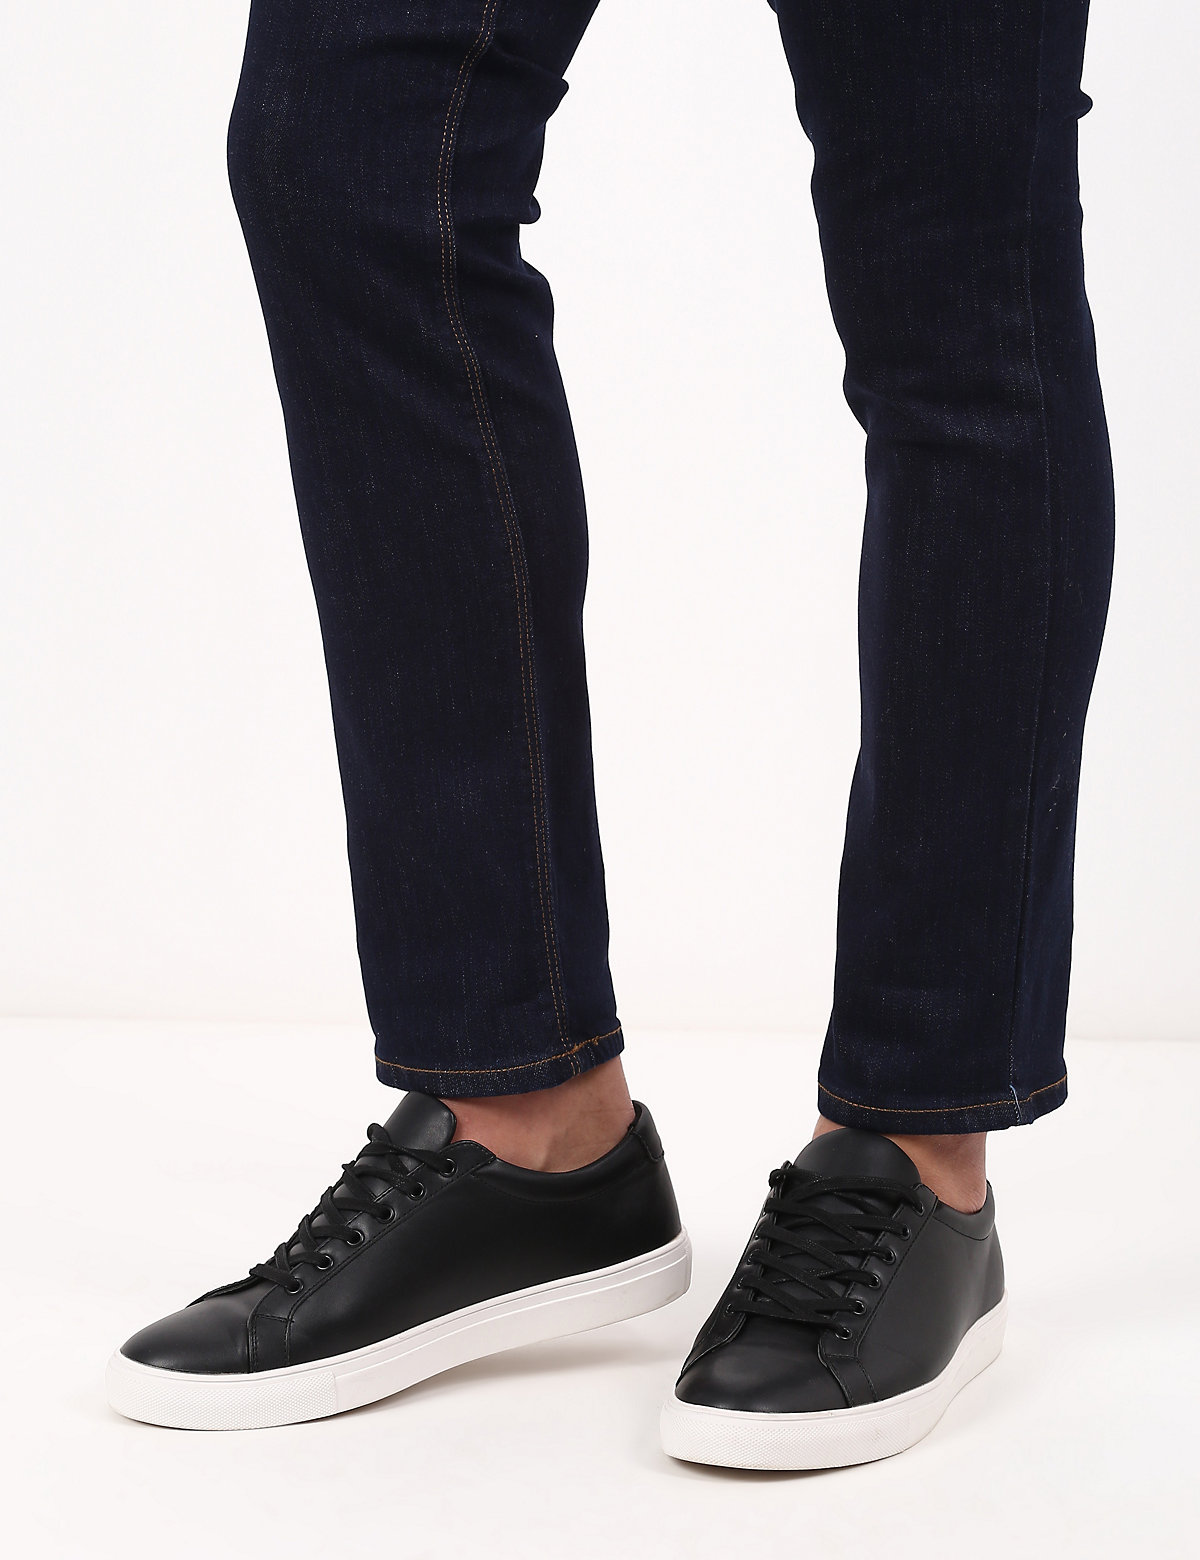 Cotton Mix Plain Tapered Fit Jeans